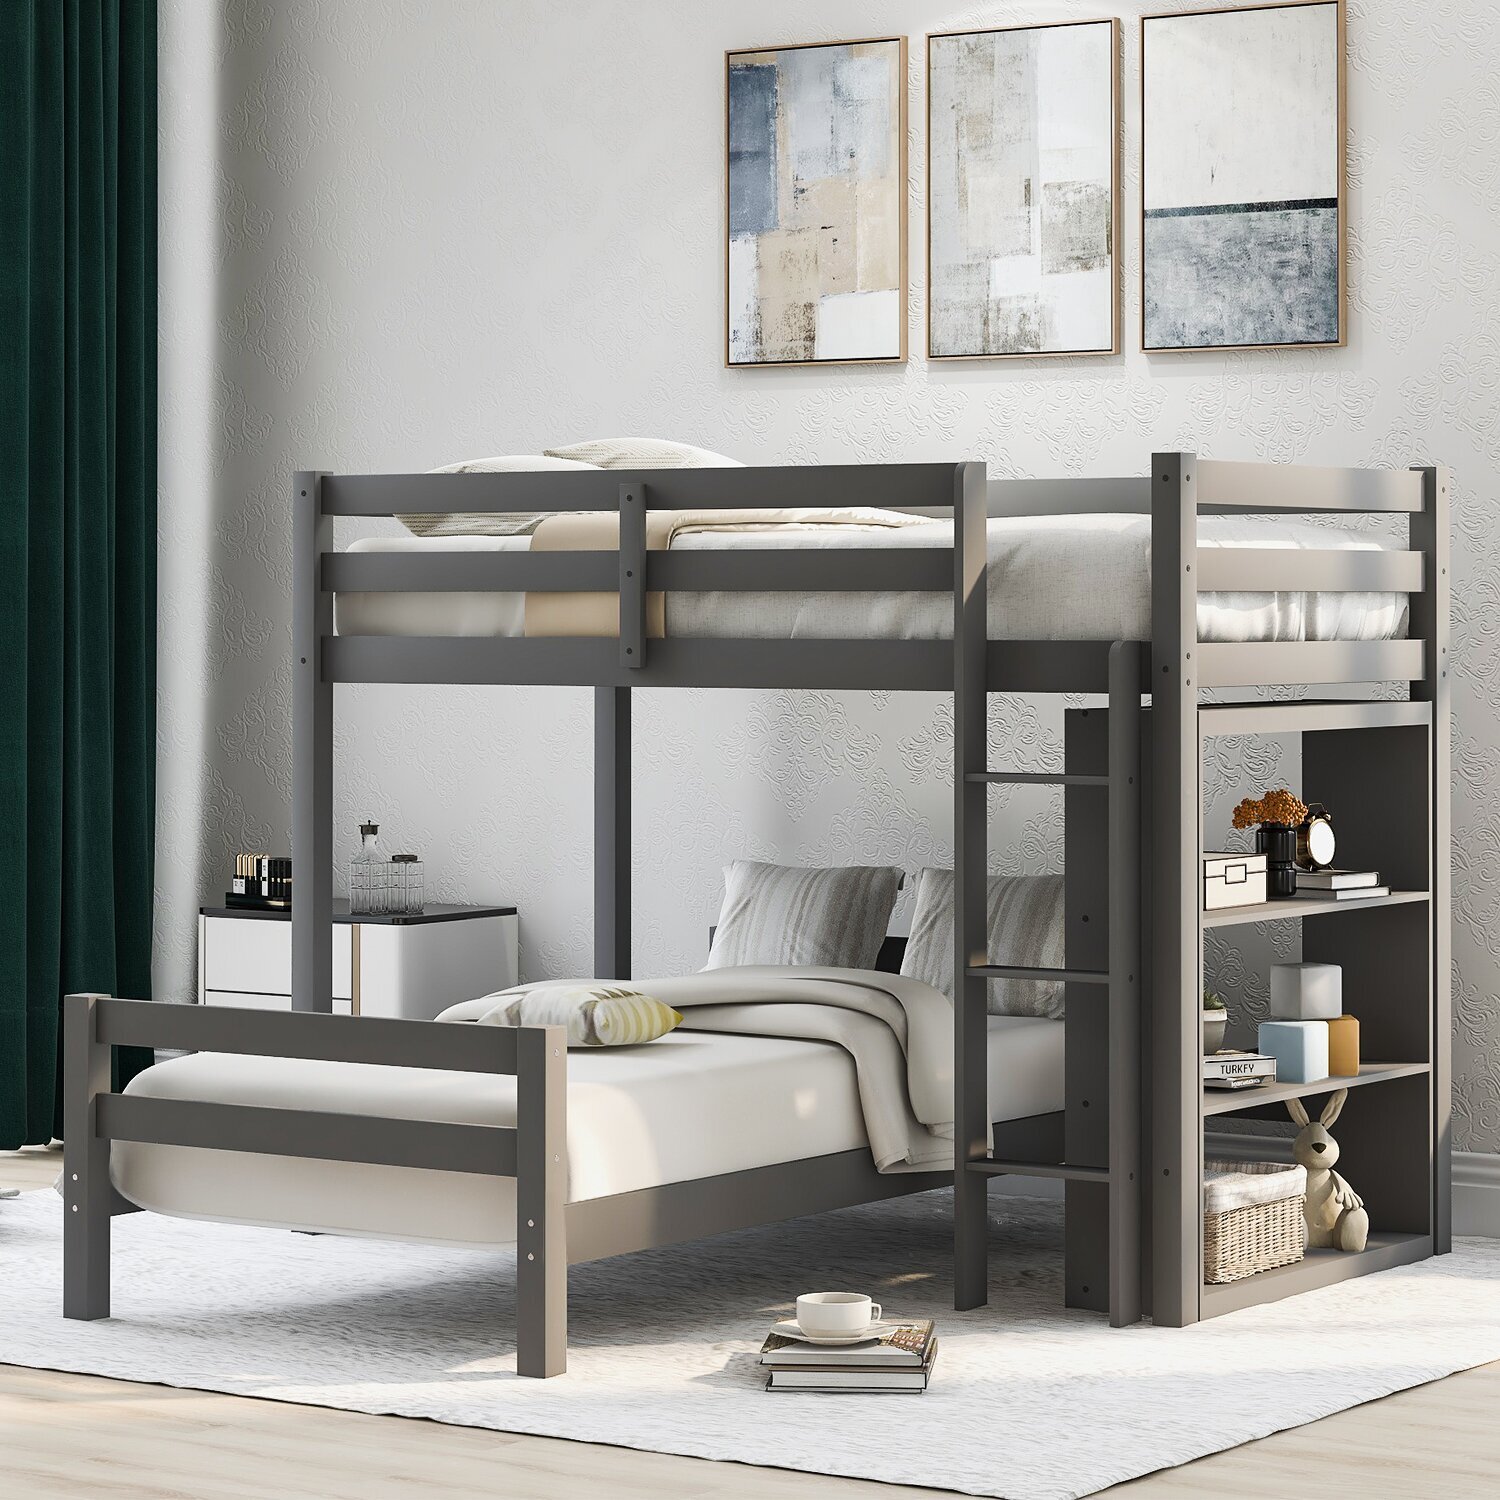 L Shaped Bunk Beds with Shelves